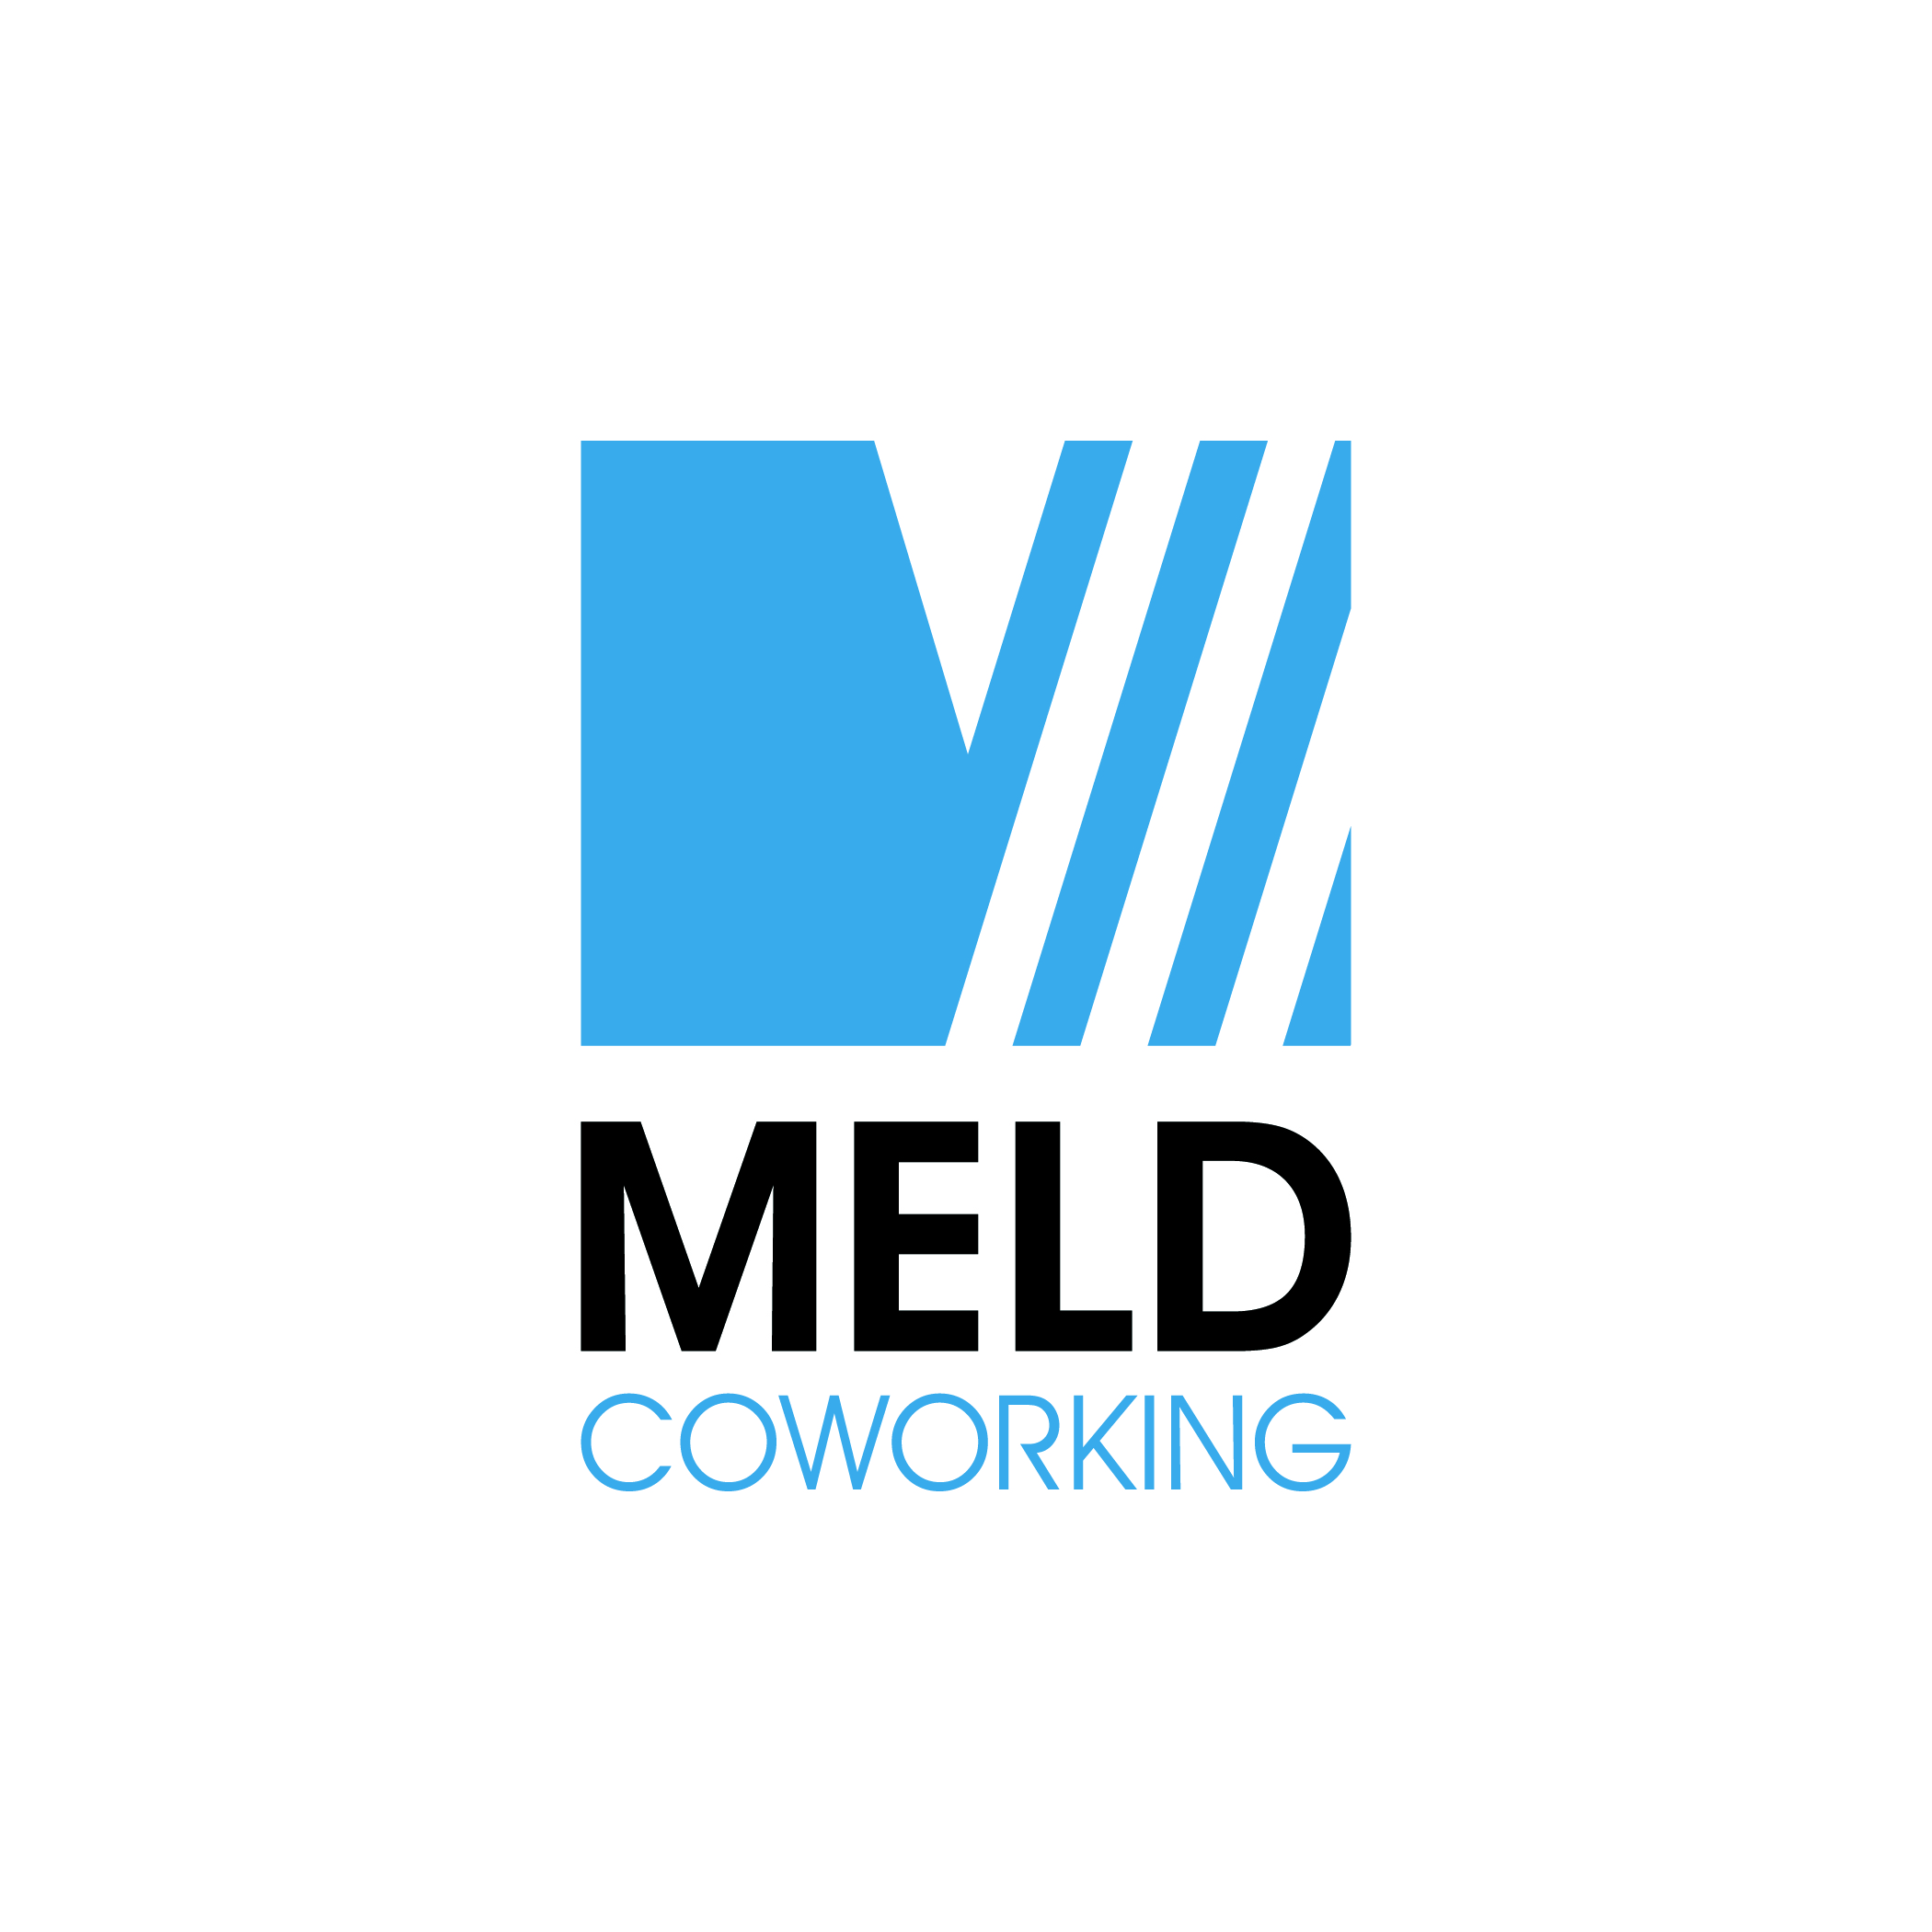 MELD Coworking